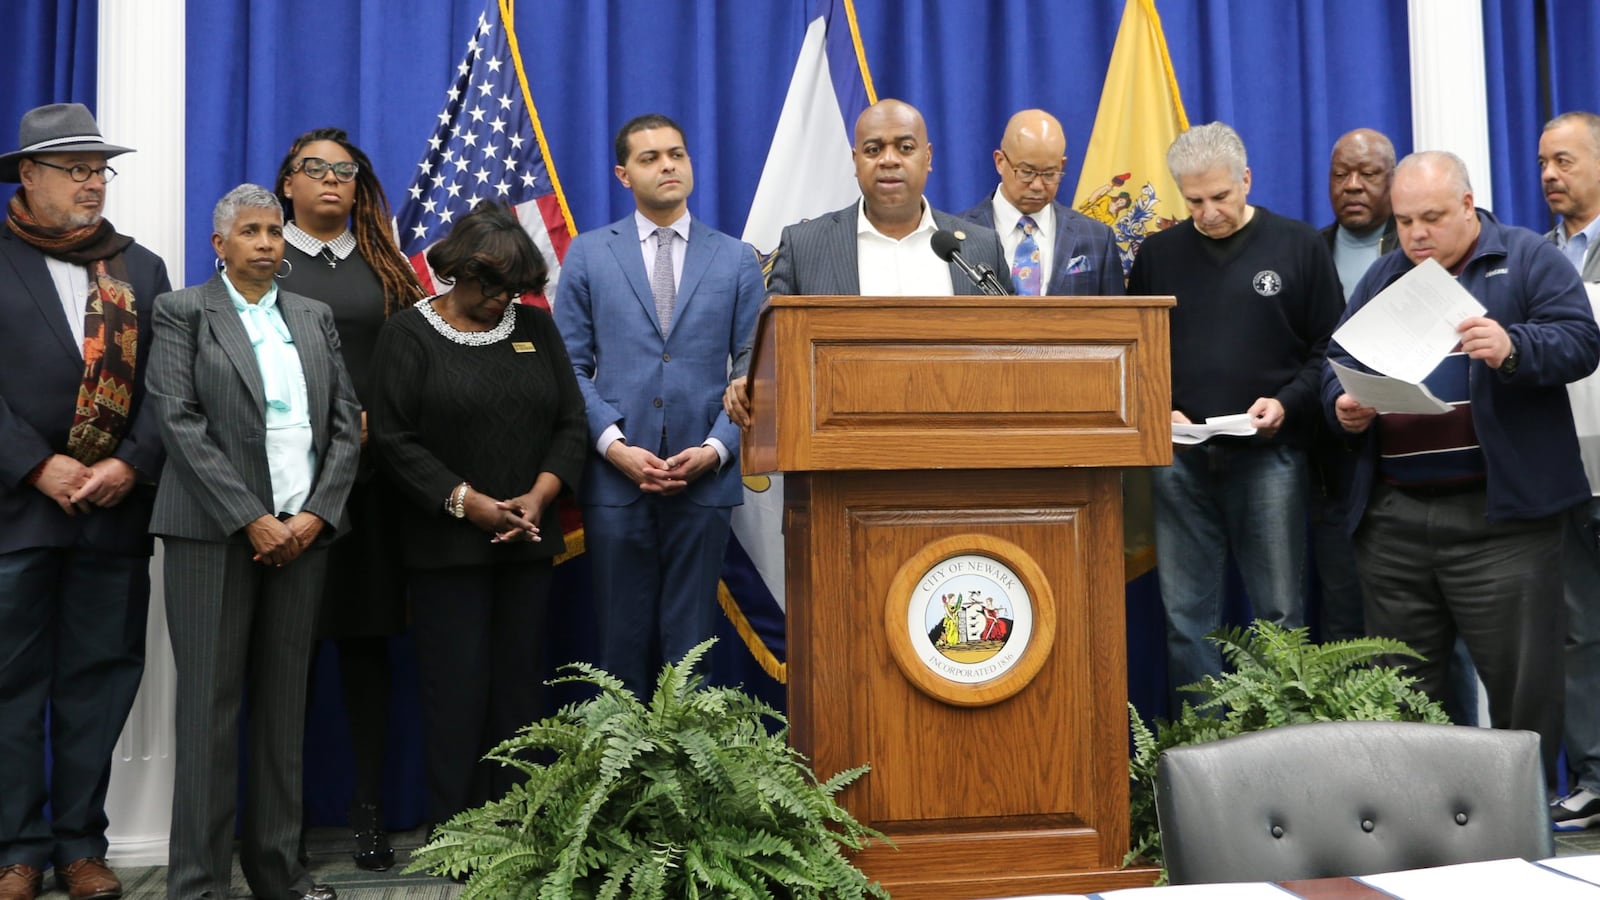 With Newark schools temporarily shuttered due to the coronavirus, Mayor Ras Baraka told students: “We want you to stay in the house, we want you to do the work that you're supposed to do."